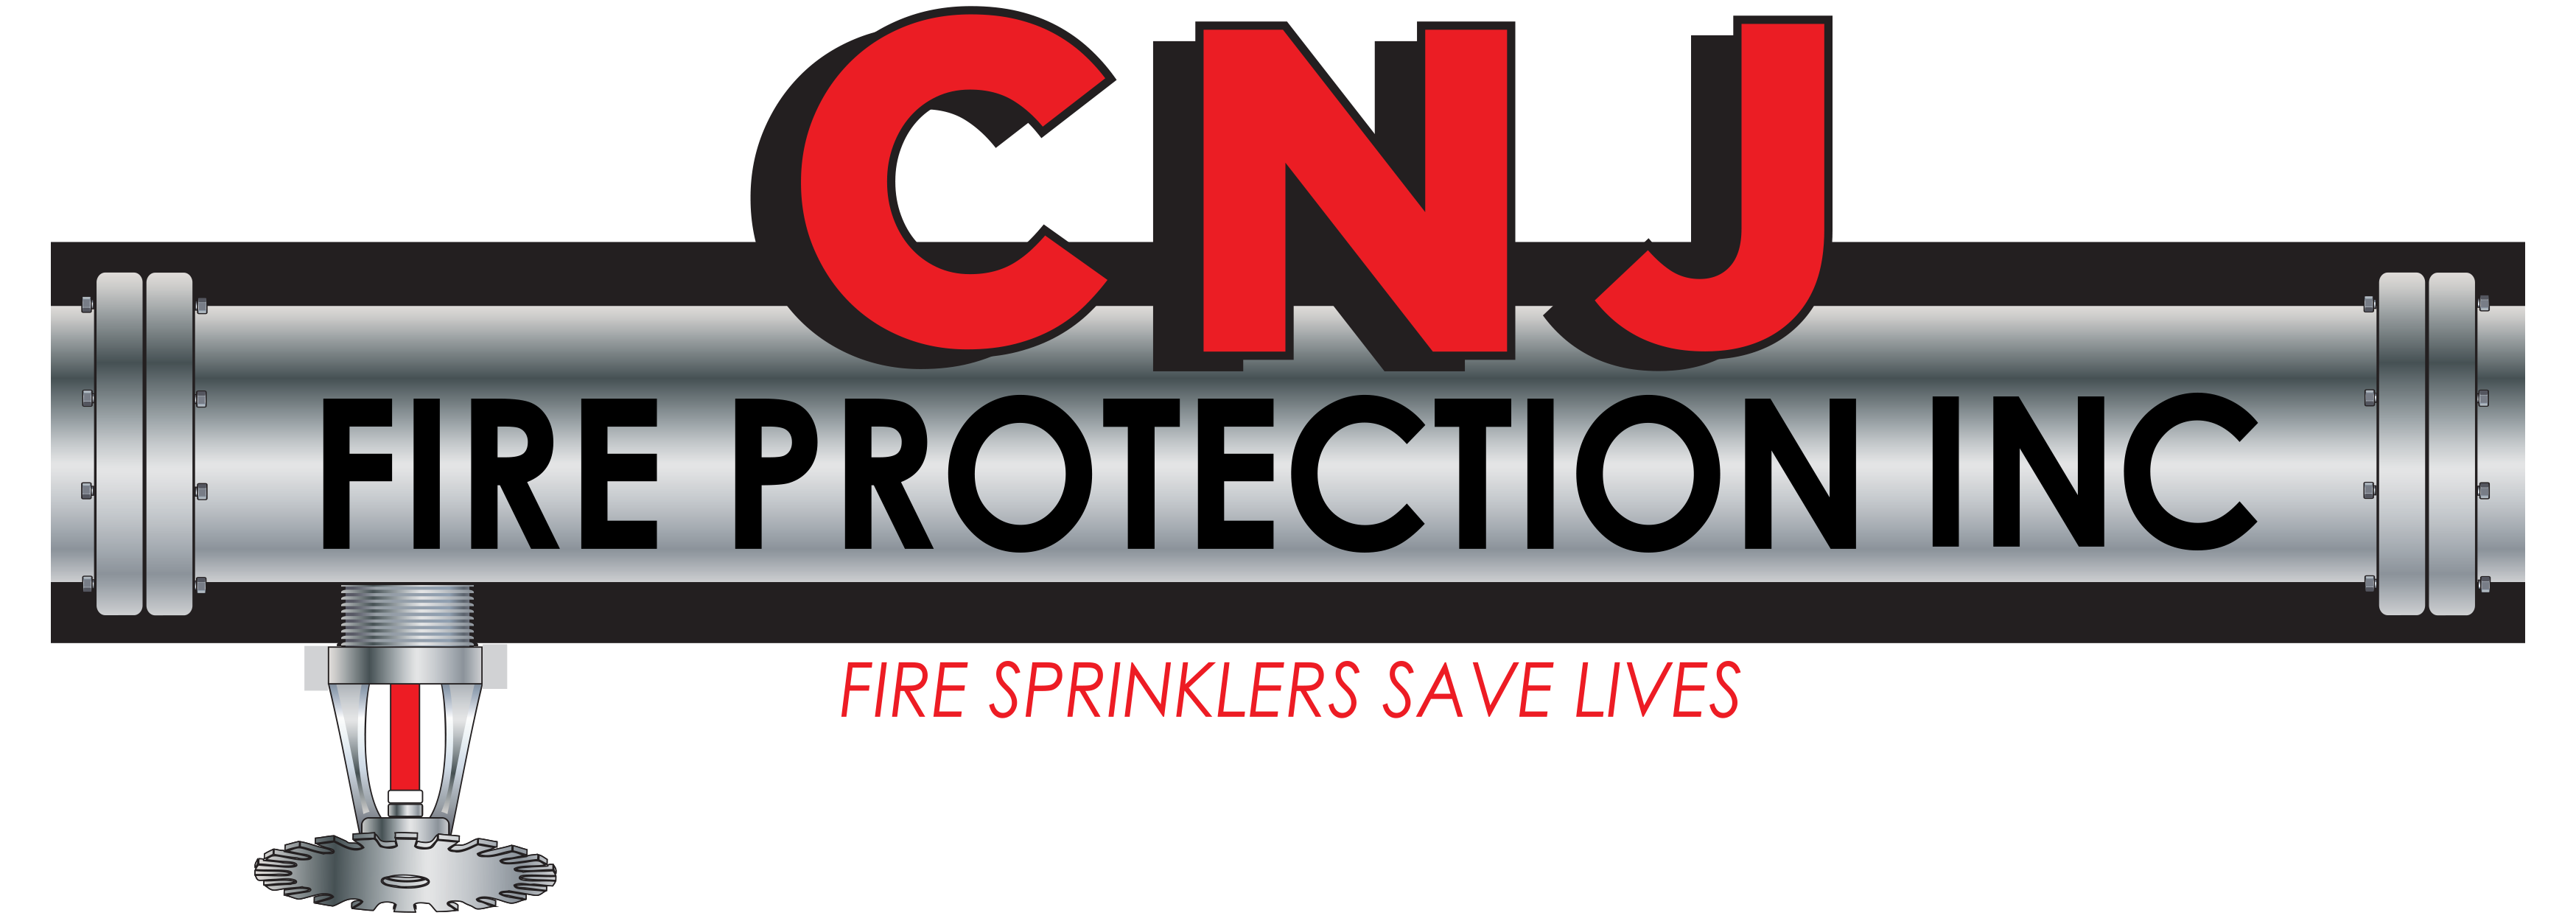 Cnj Fire Protection